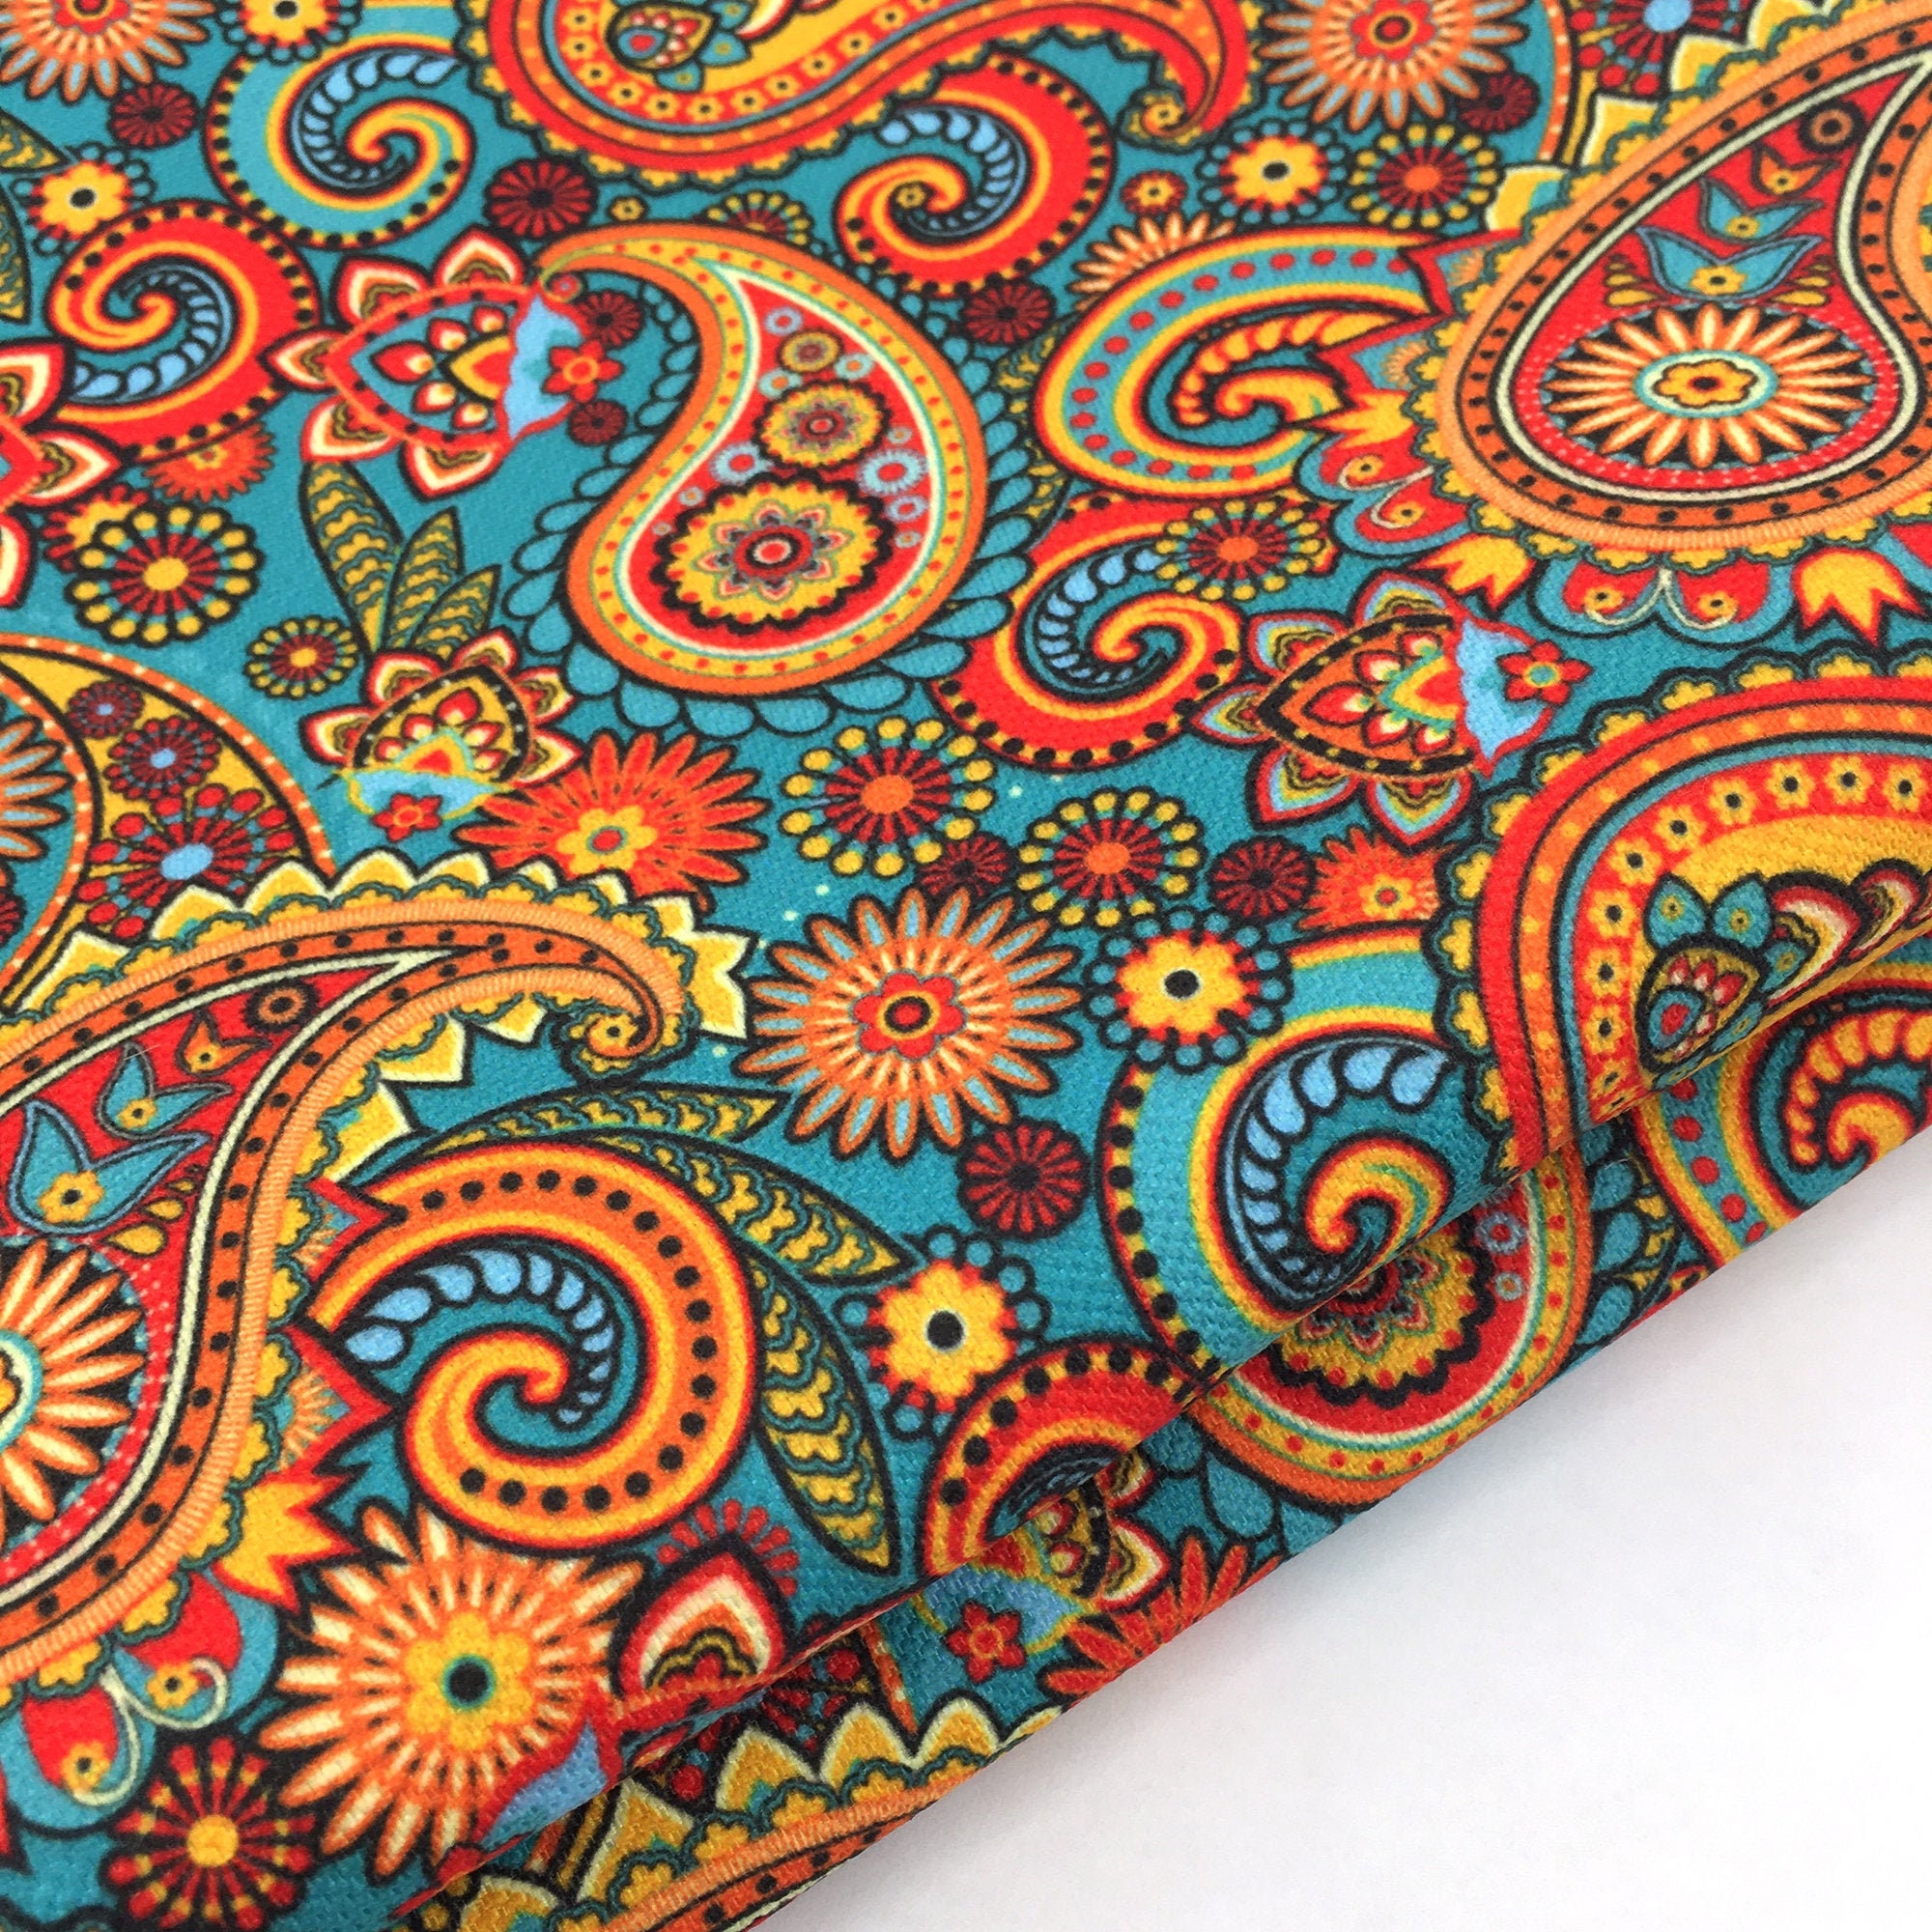 Boho Fabric by The Yard, Paisley Floral Upholstery Fabric, Colorful Retro  Decorative Fabric, Mandala Outdoor Fabric, Exotic Flower DIY Art Waterproof